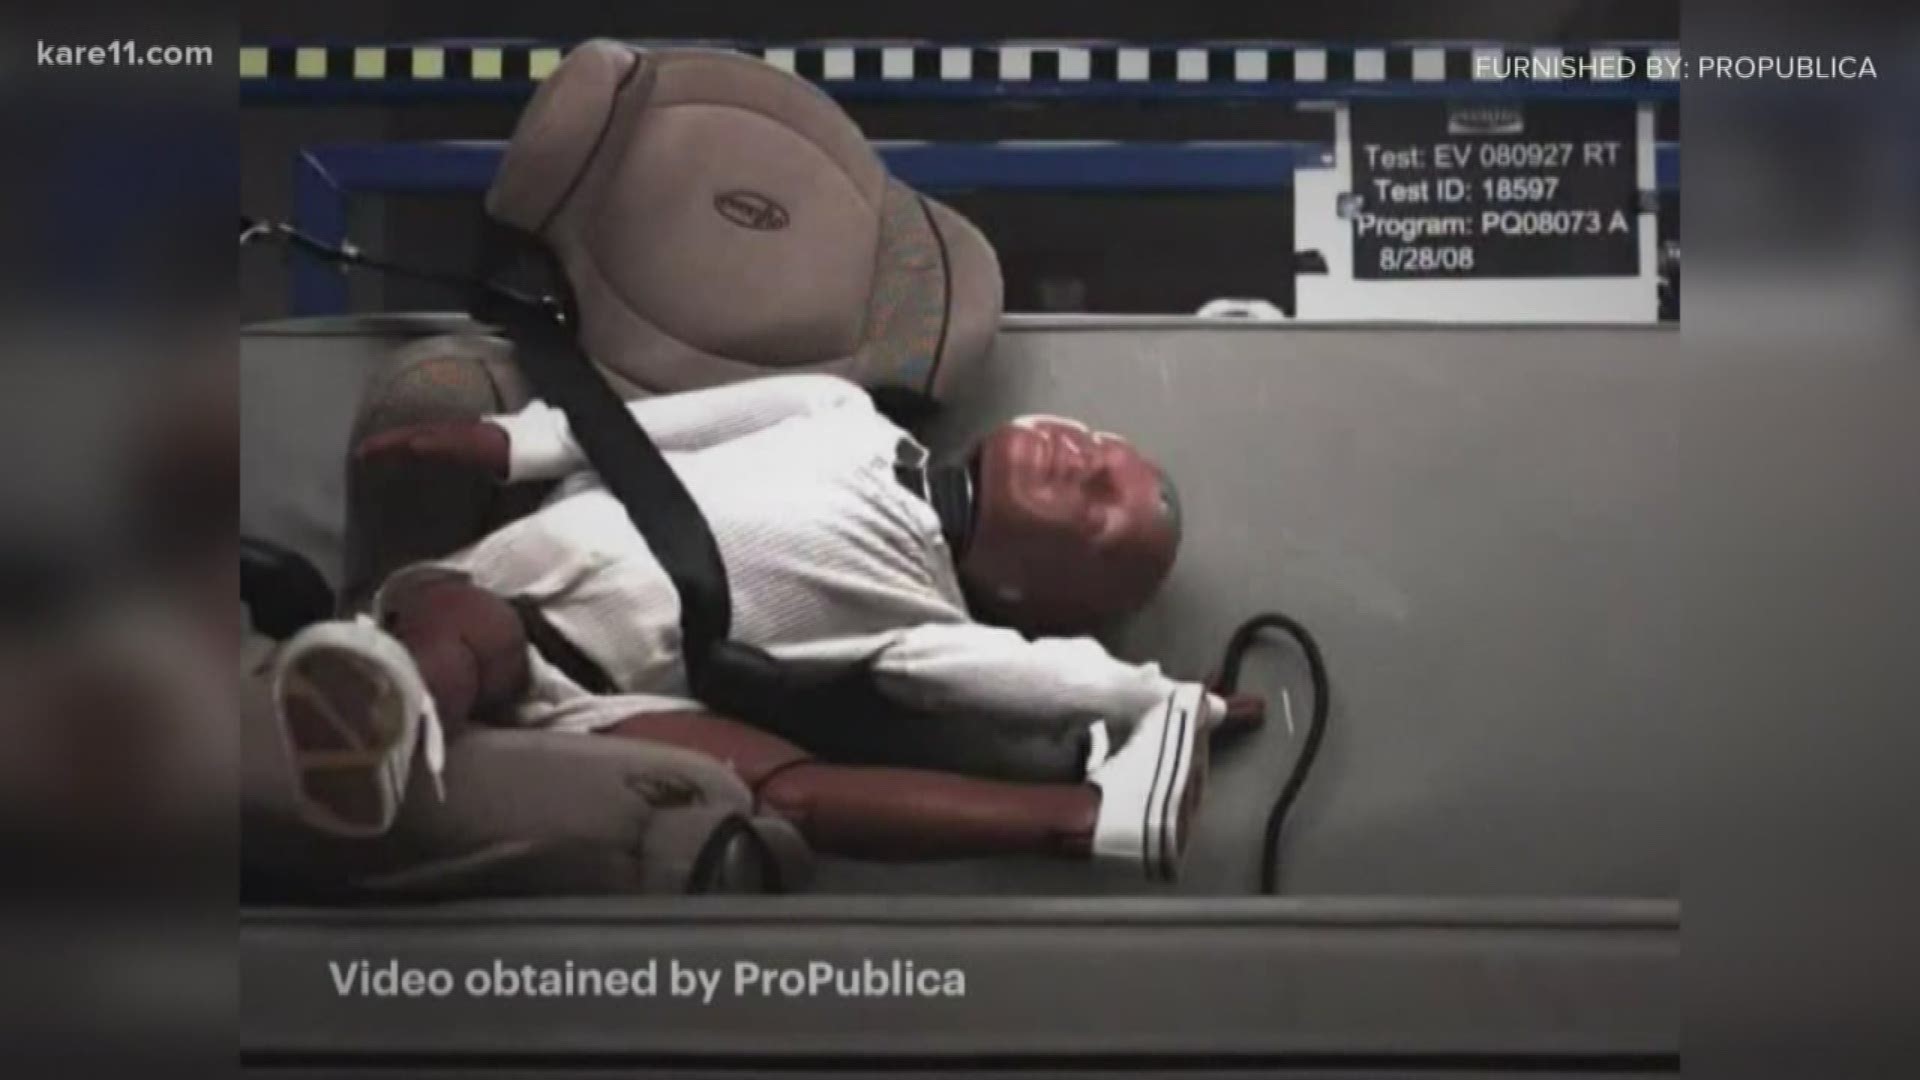 Videos from side-impact crash tests, obtained by ProPublica, showed a dummy being tossed around in a child's booster seat.